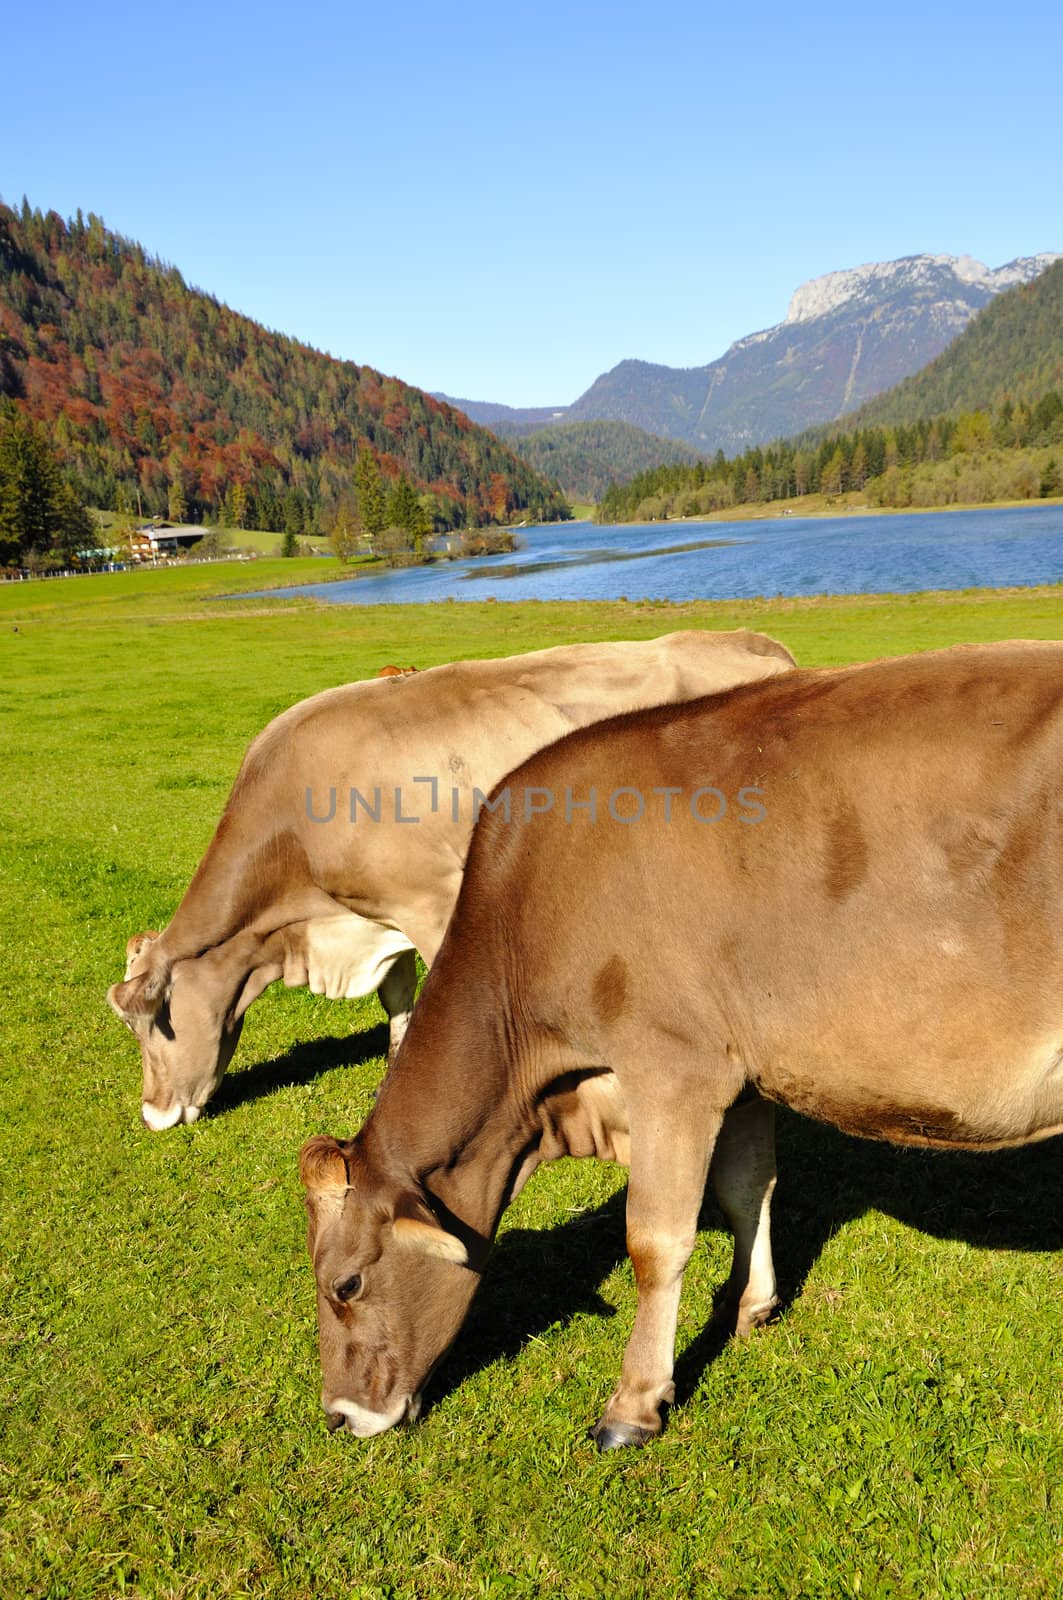 Cows grazing in front of the Pillersee in Tirol